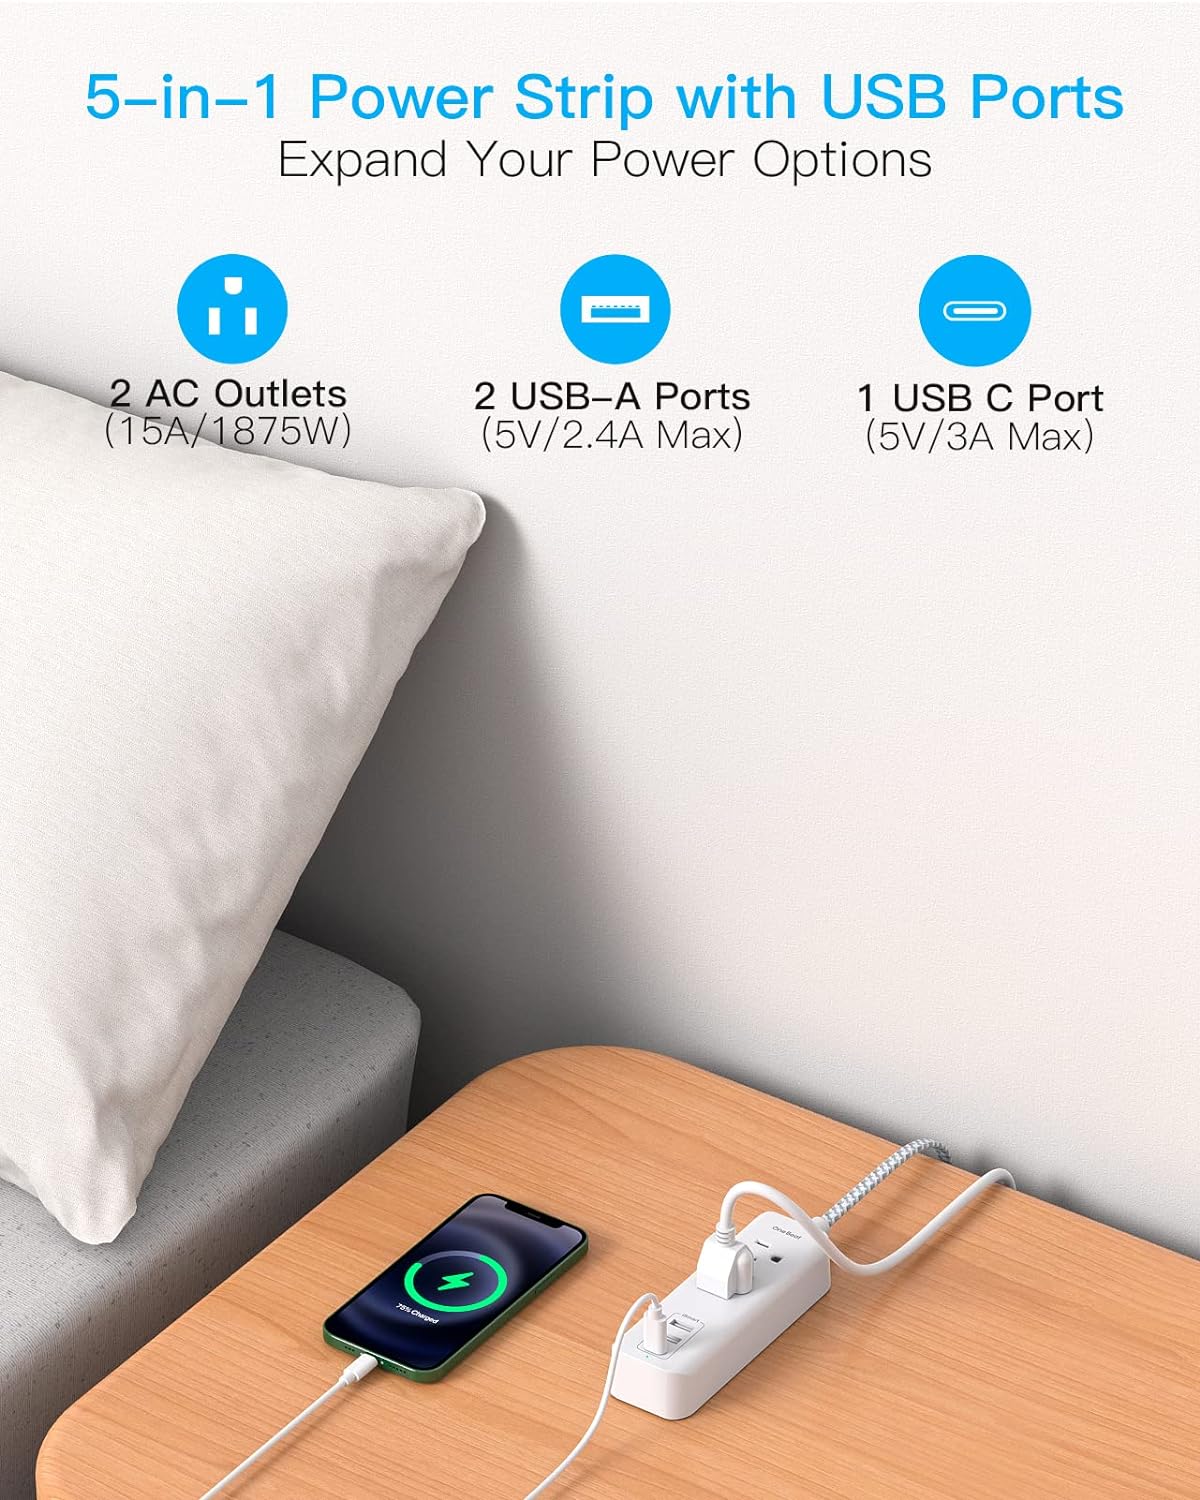 Cruise Essentials, Usb C Travel Power Strip, Flat Plug Power Strip With 2 Outlets 3 Usb Ports (1 Usb C), 5Ft Extension Cord Charging Station, Non Surge Protector For Cruise Ship, Travel, Home